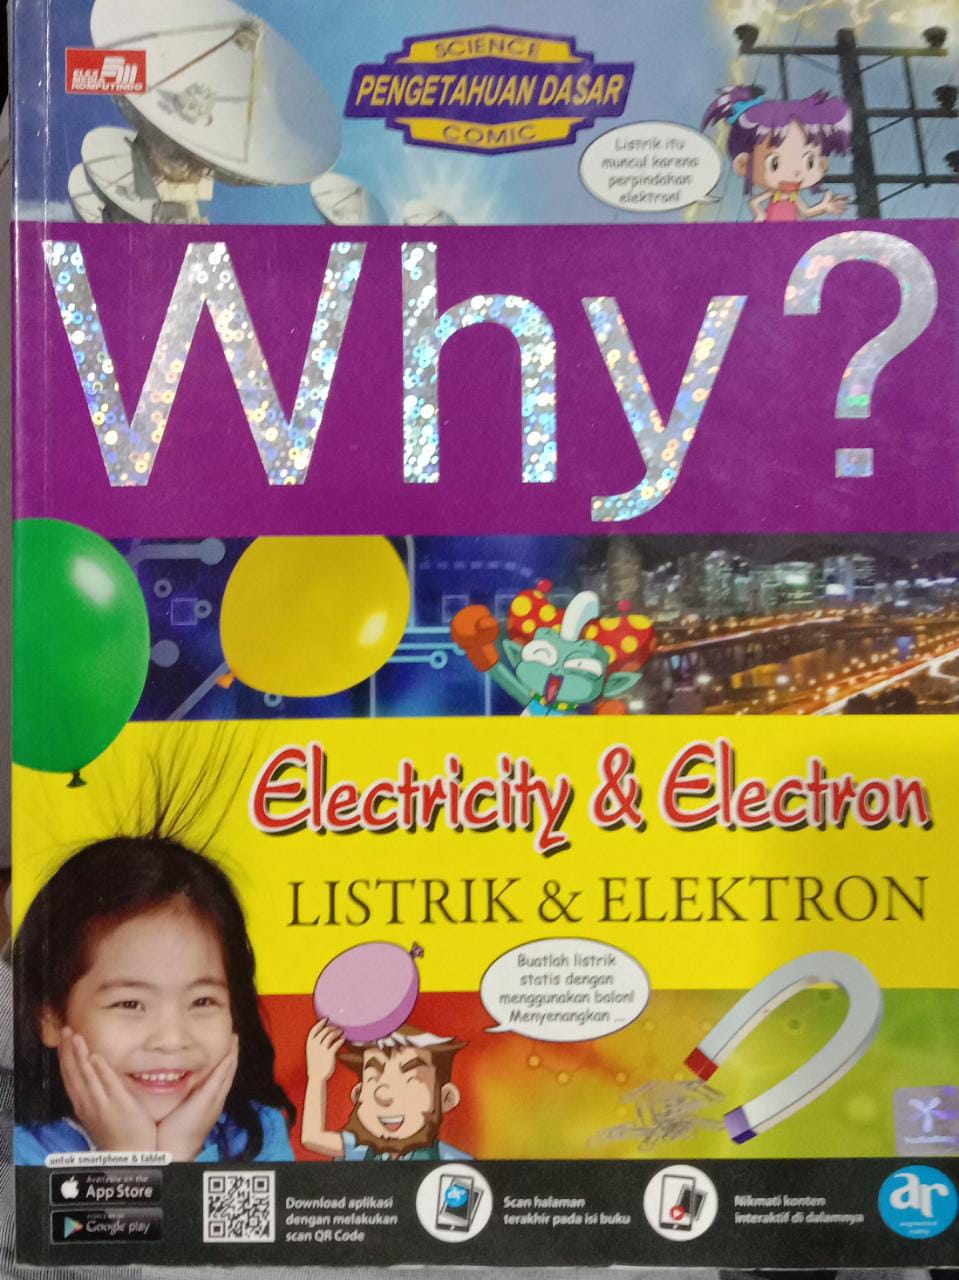 Why electricity & electron